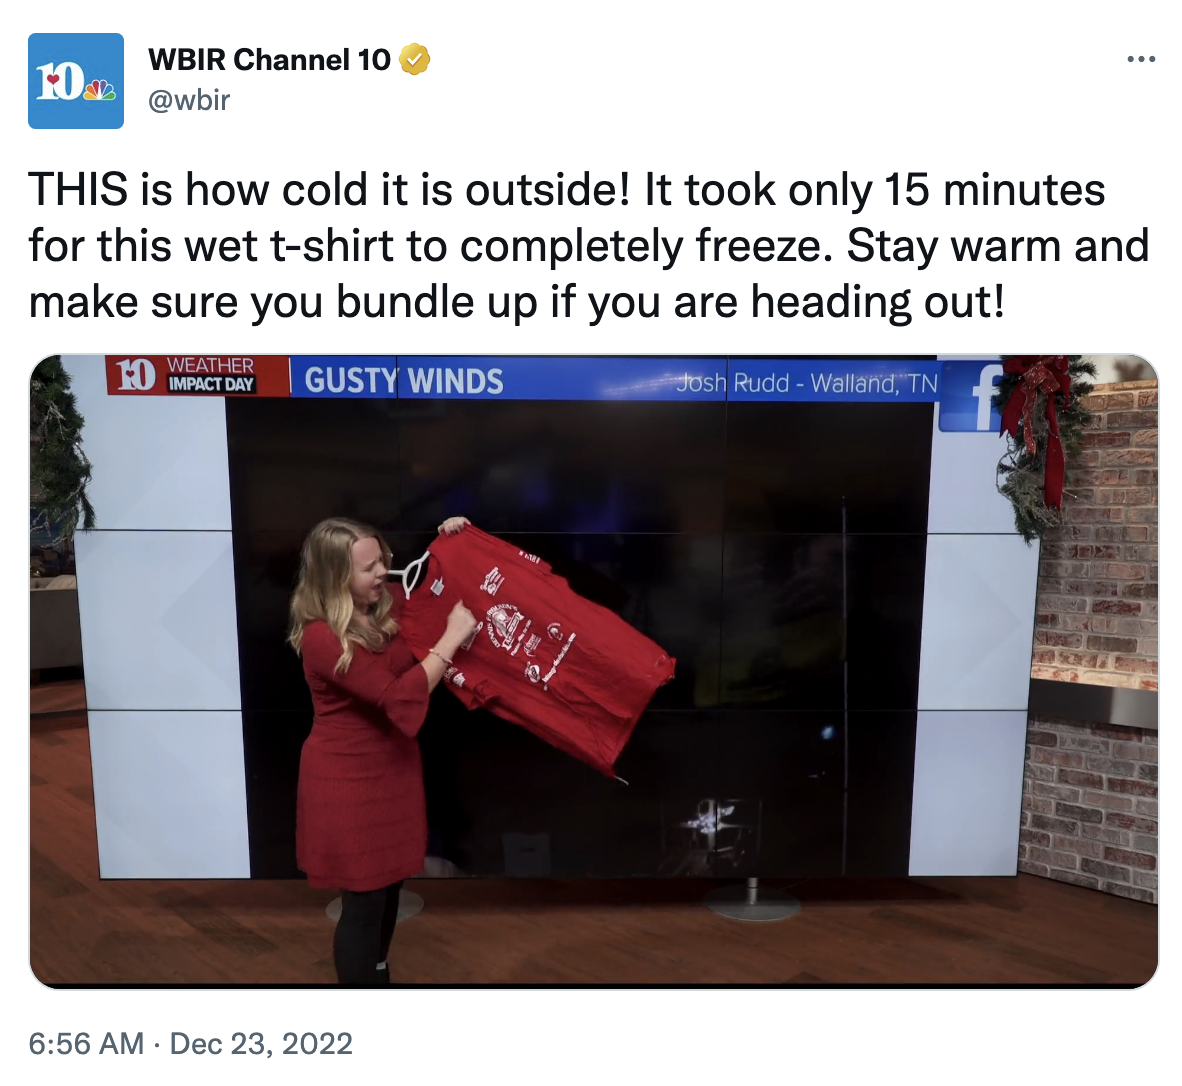 A woman holding up a frozen shirt with text explaining it only took 15 minutes for the wet T-shirt to freeze